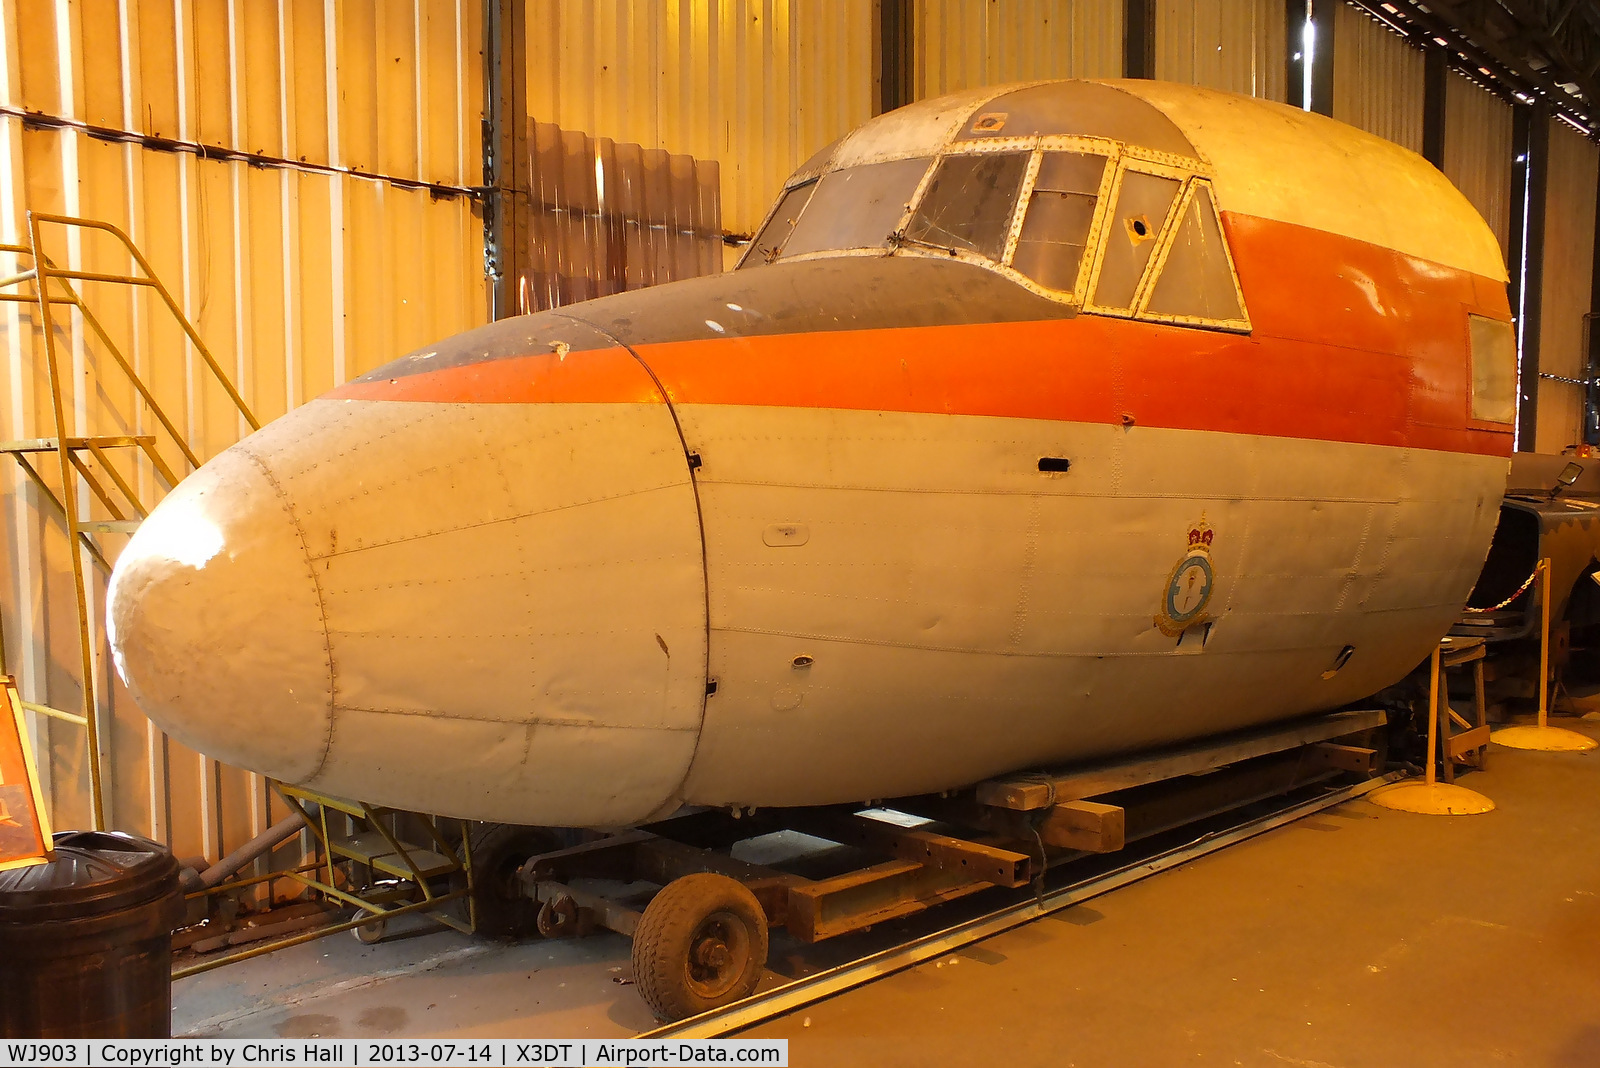 WJ903, 1952 Vickers Varsity T.1 C/N 715, preserved at the South Yorkshire Aircraft Museum, AeroVenture, Doncaster